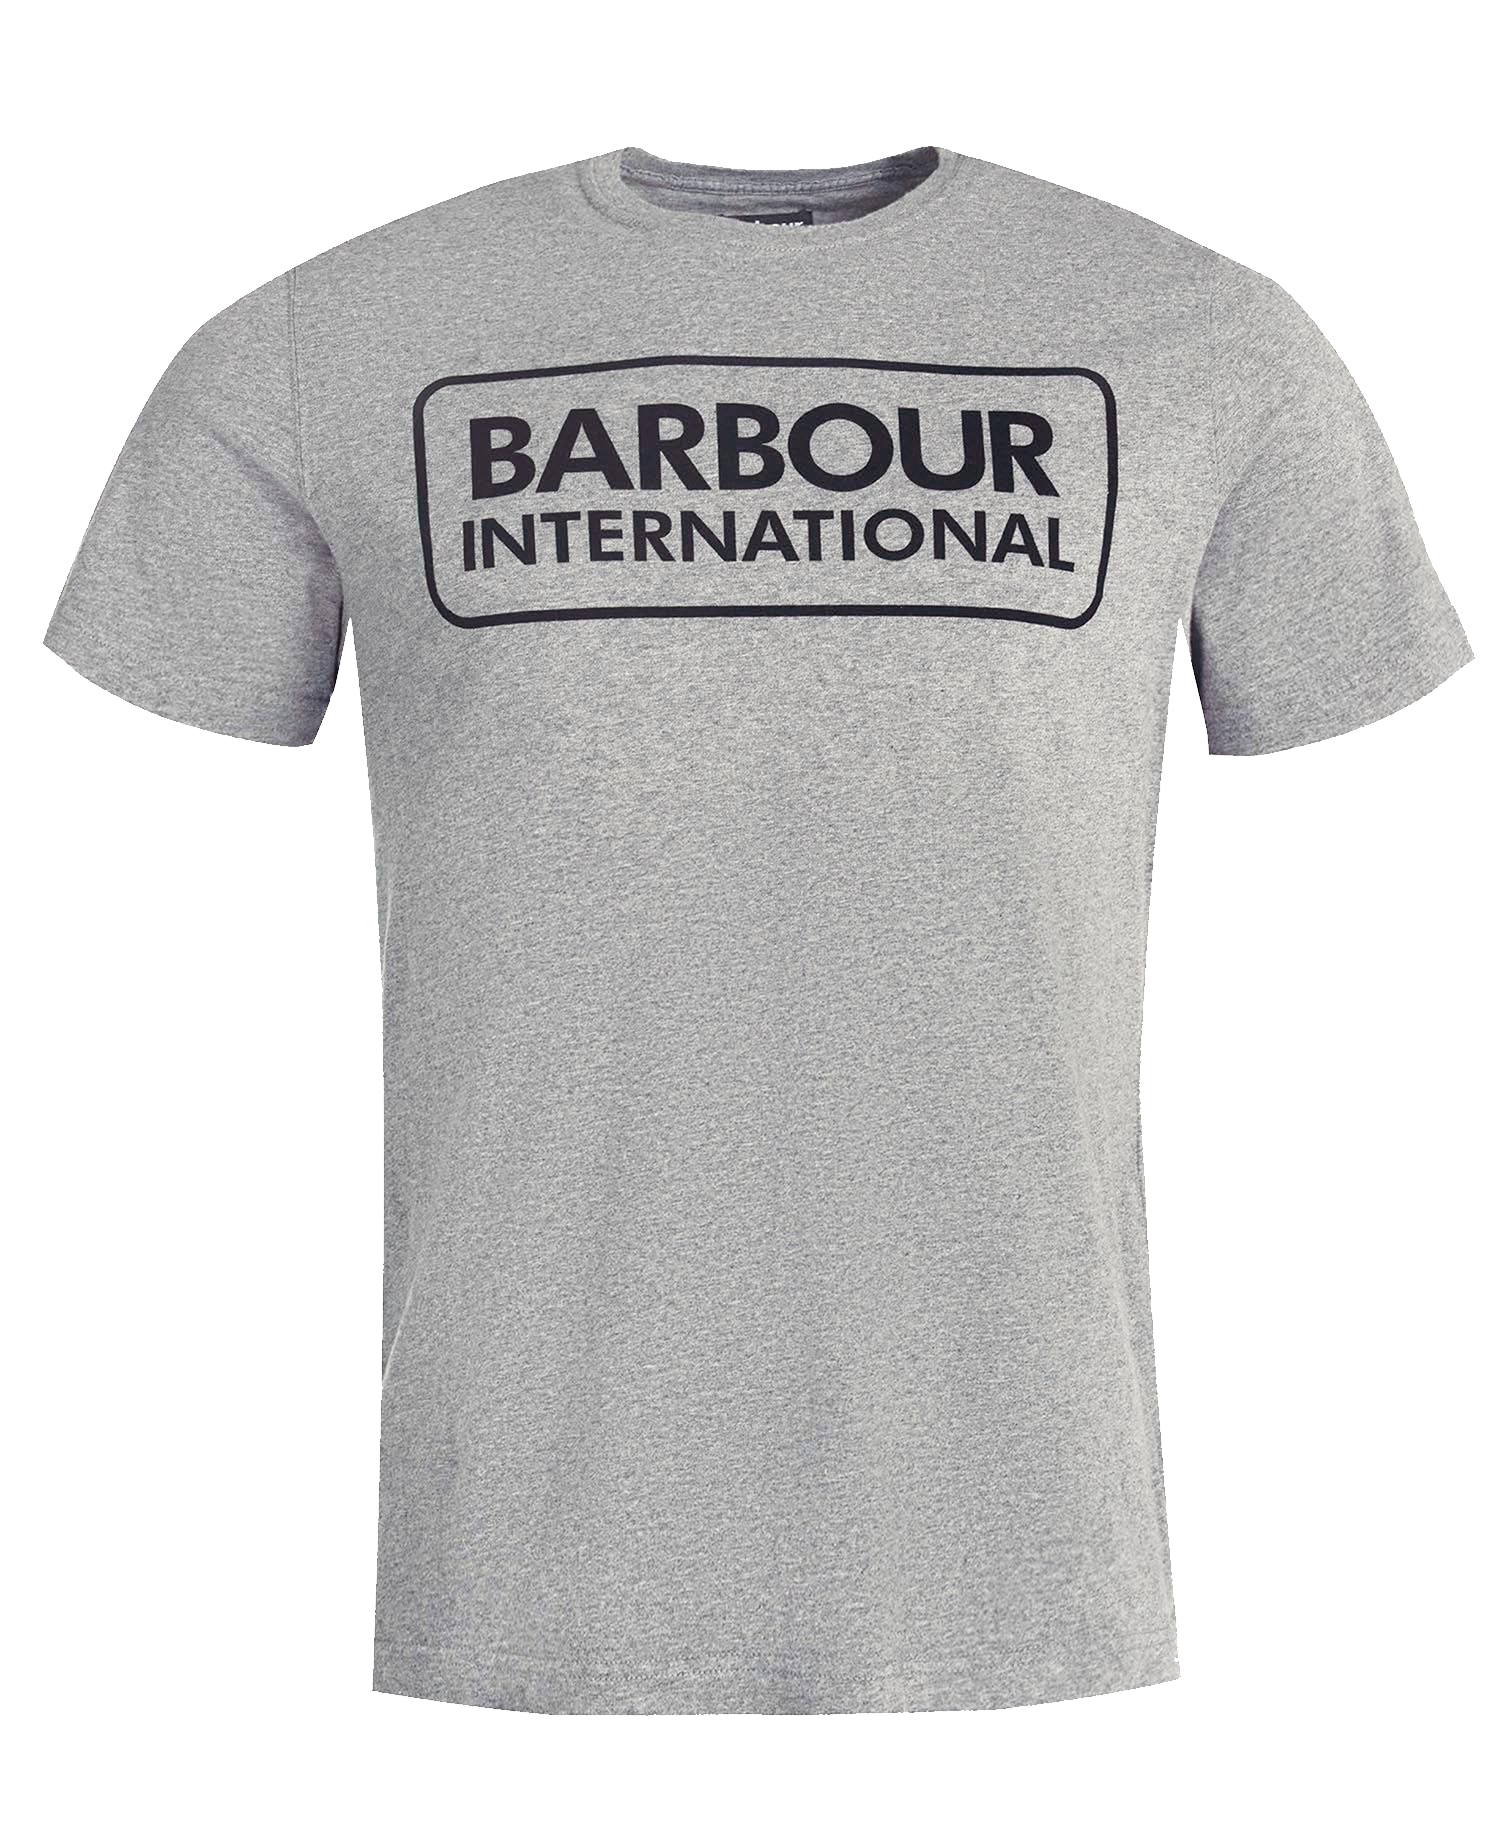 Barbour Barbour International Graphic Tee Anthracite Marl